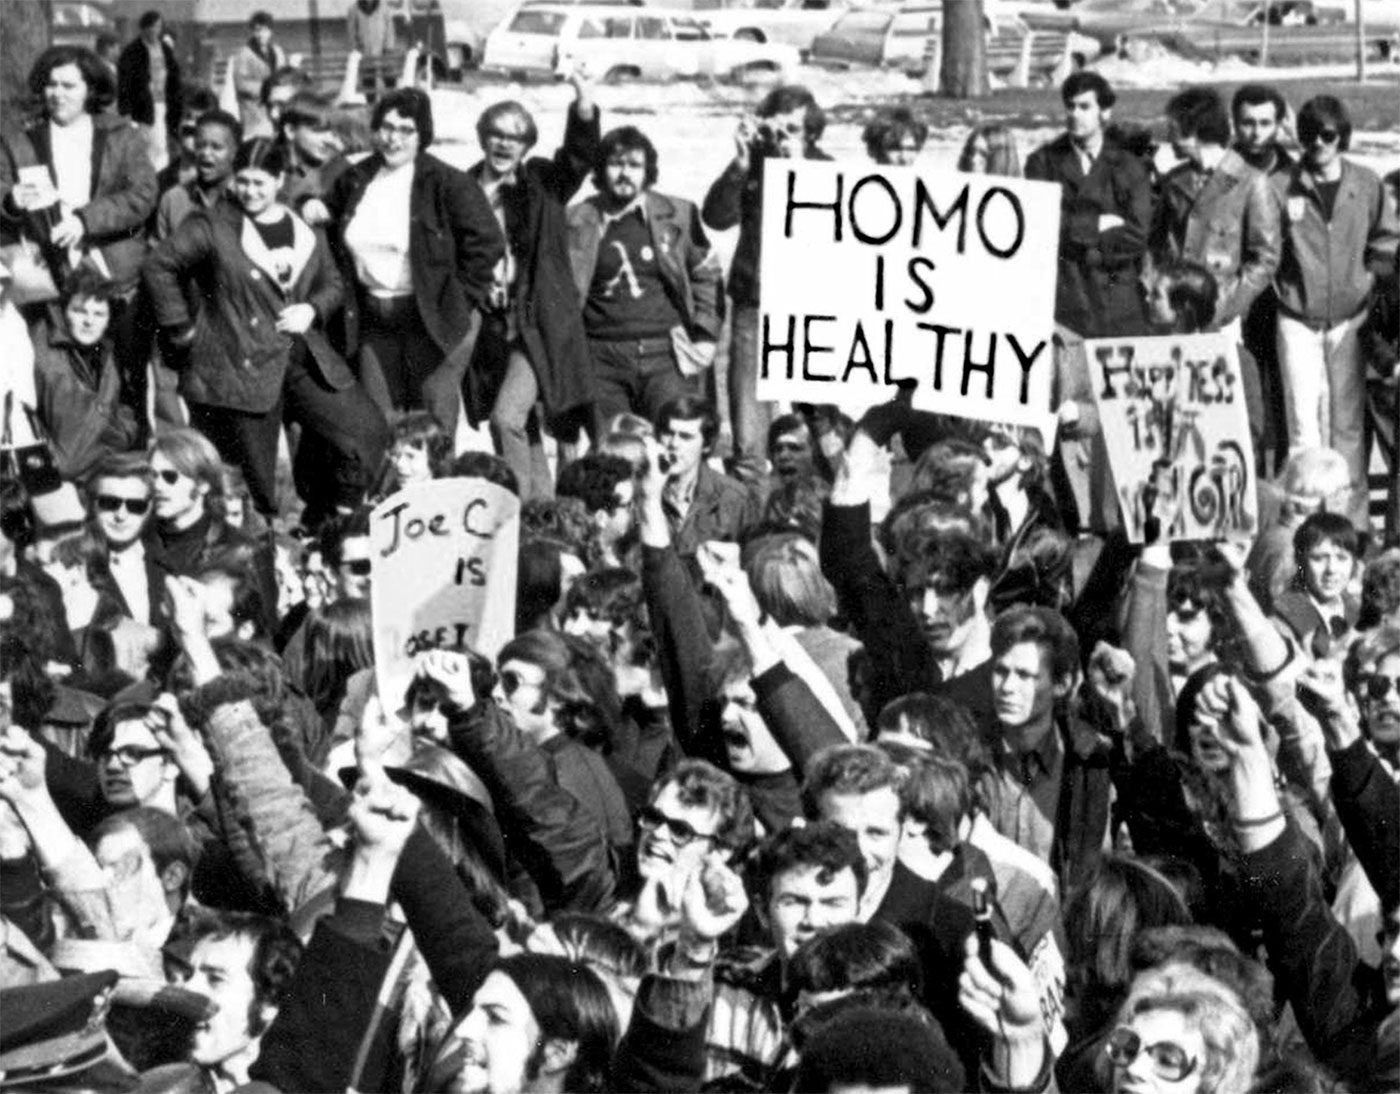 Demonstrators gathered in Albany, New York, in 1971 to demand gay rights and to declare that 